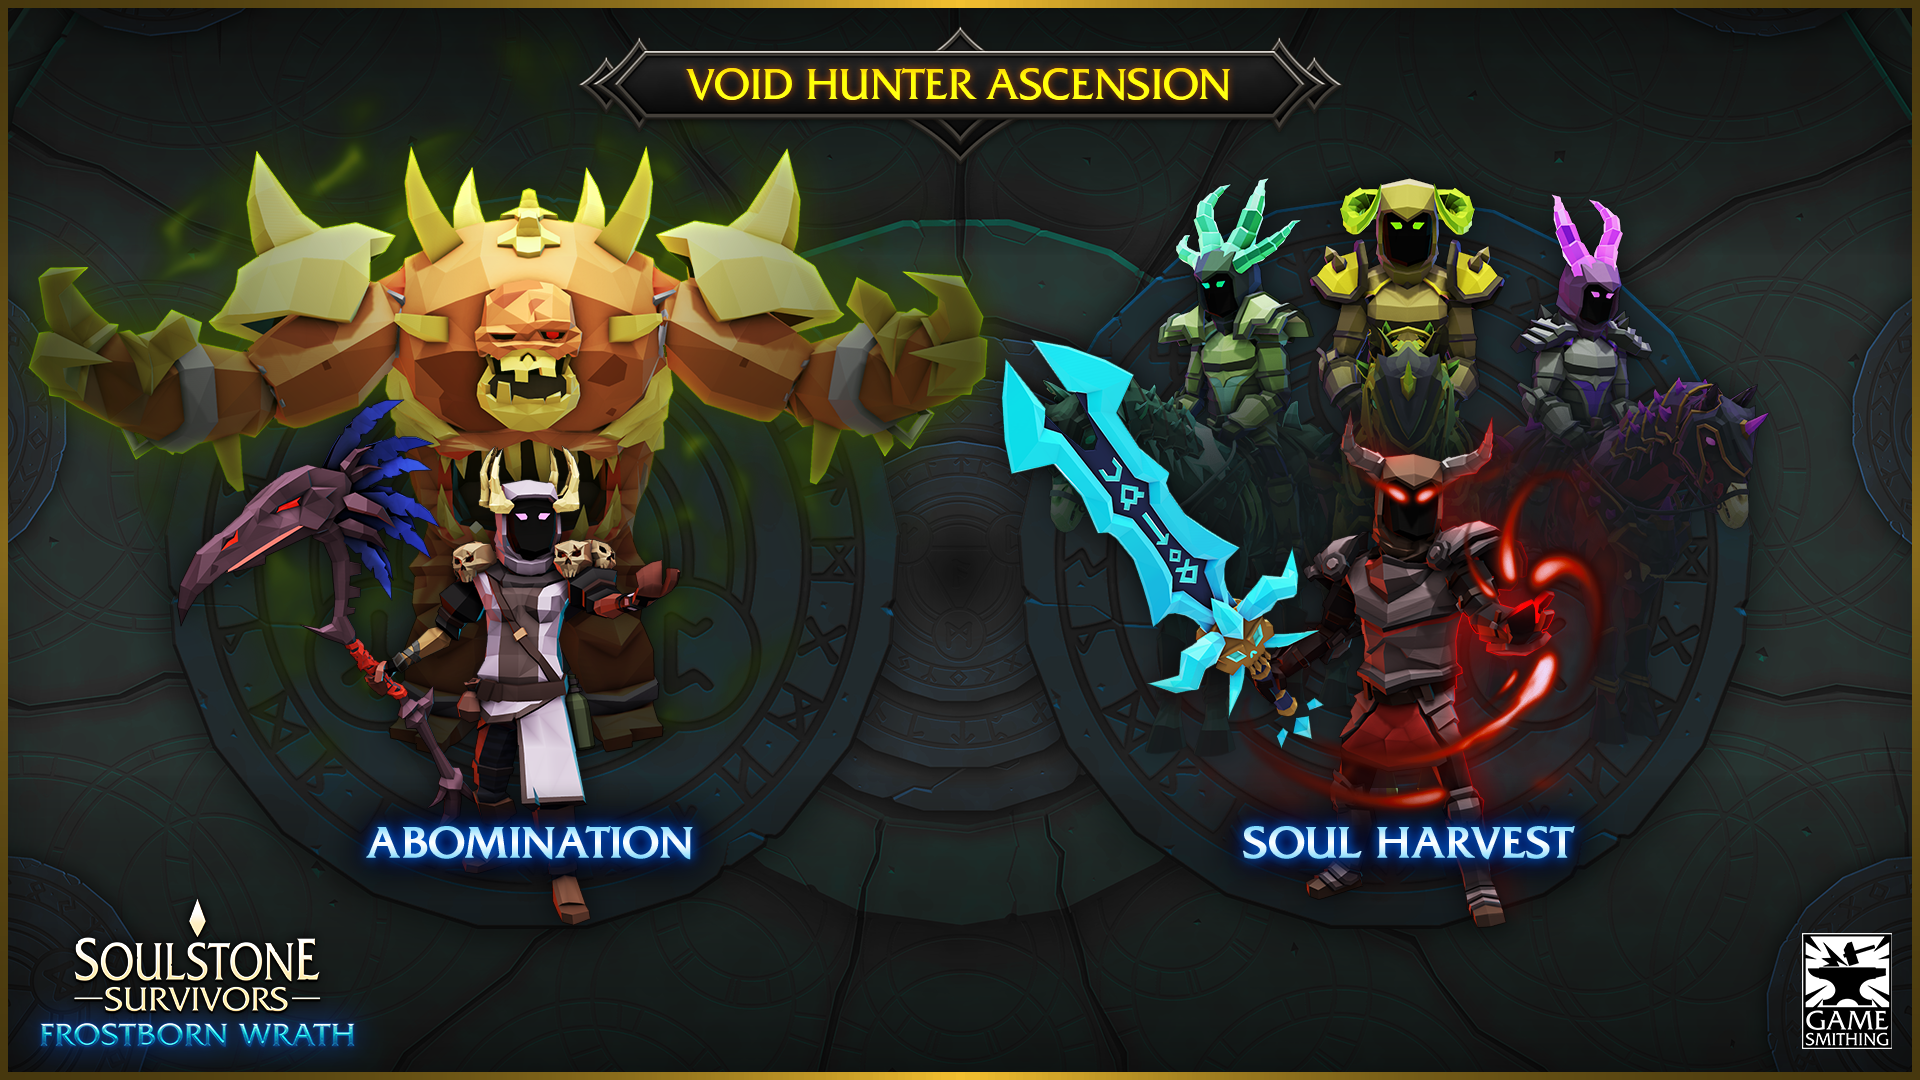 UPDATE: PATH OF ASCENSION IS LIVE! · Soulstone Survivors update